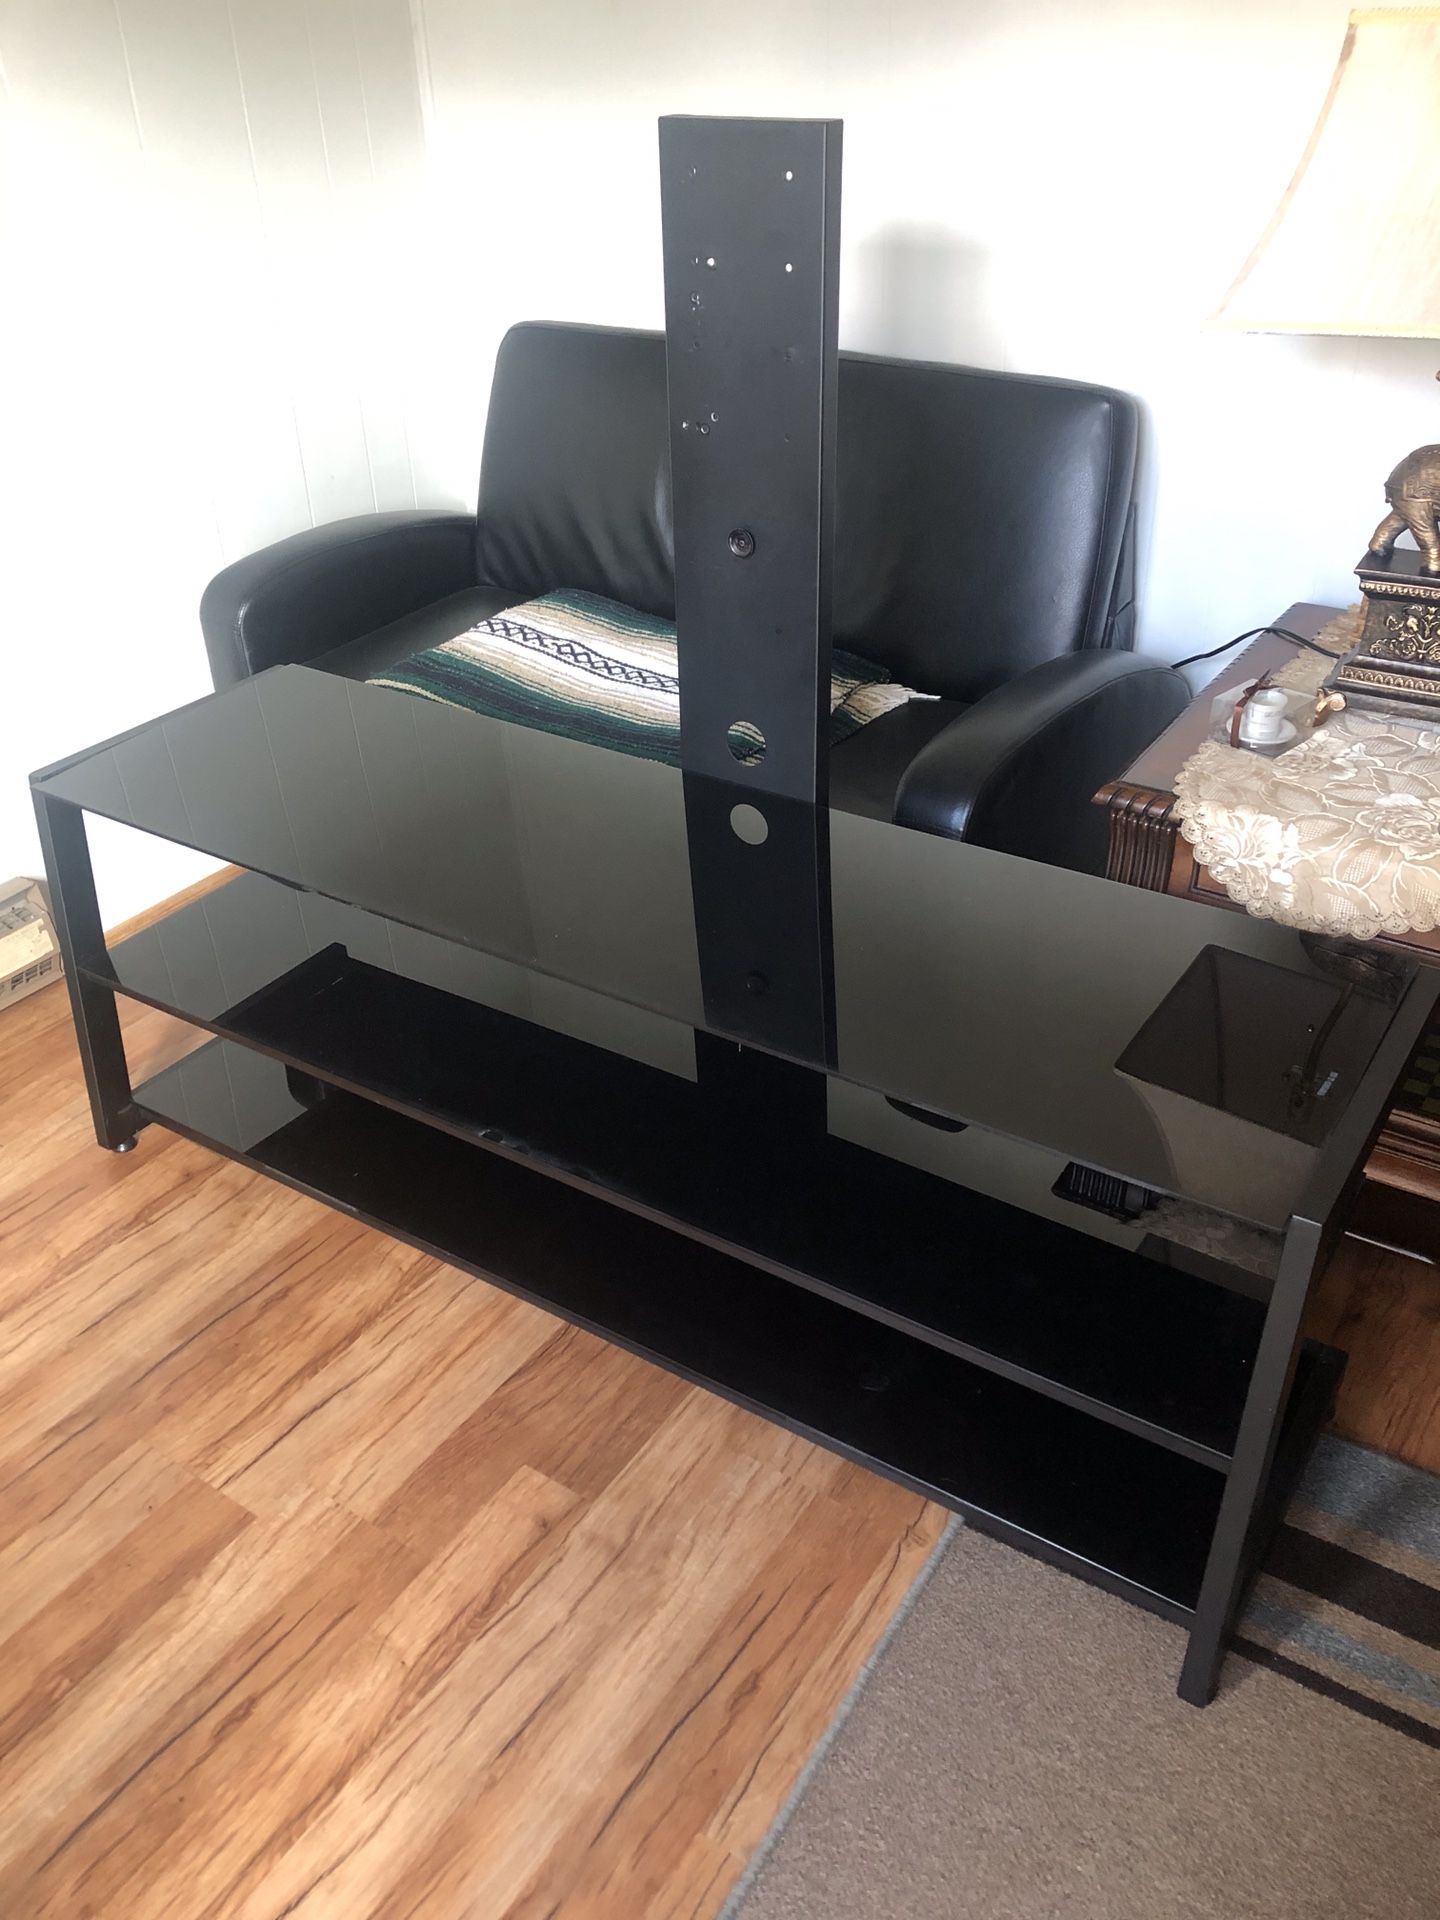 Black Tv Stand for Sale